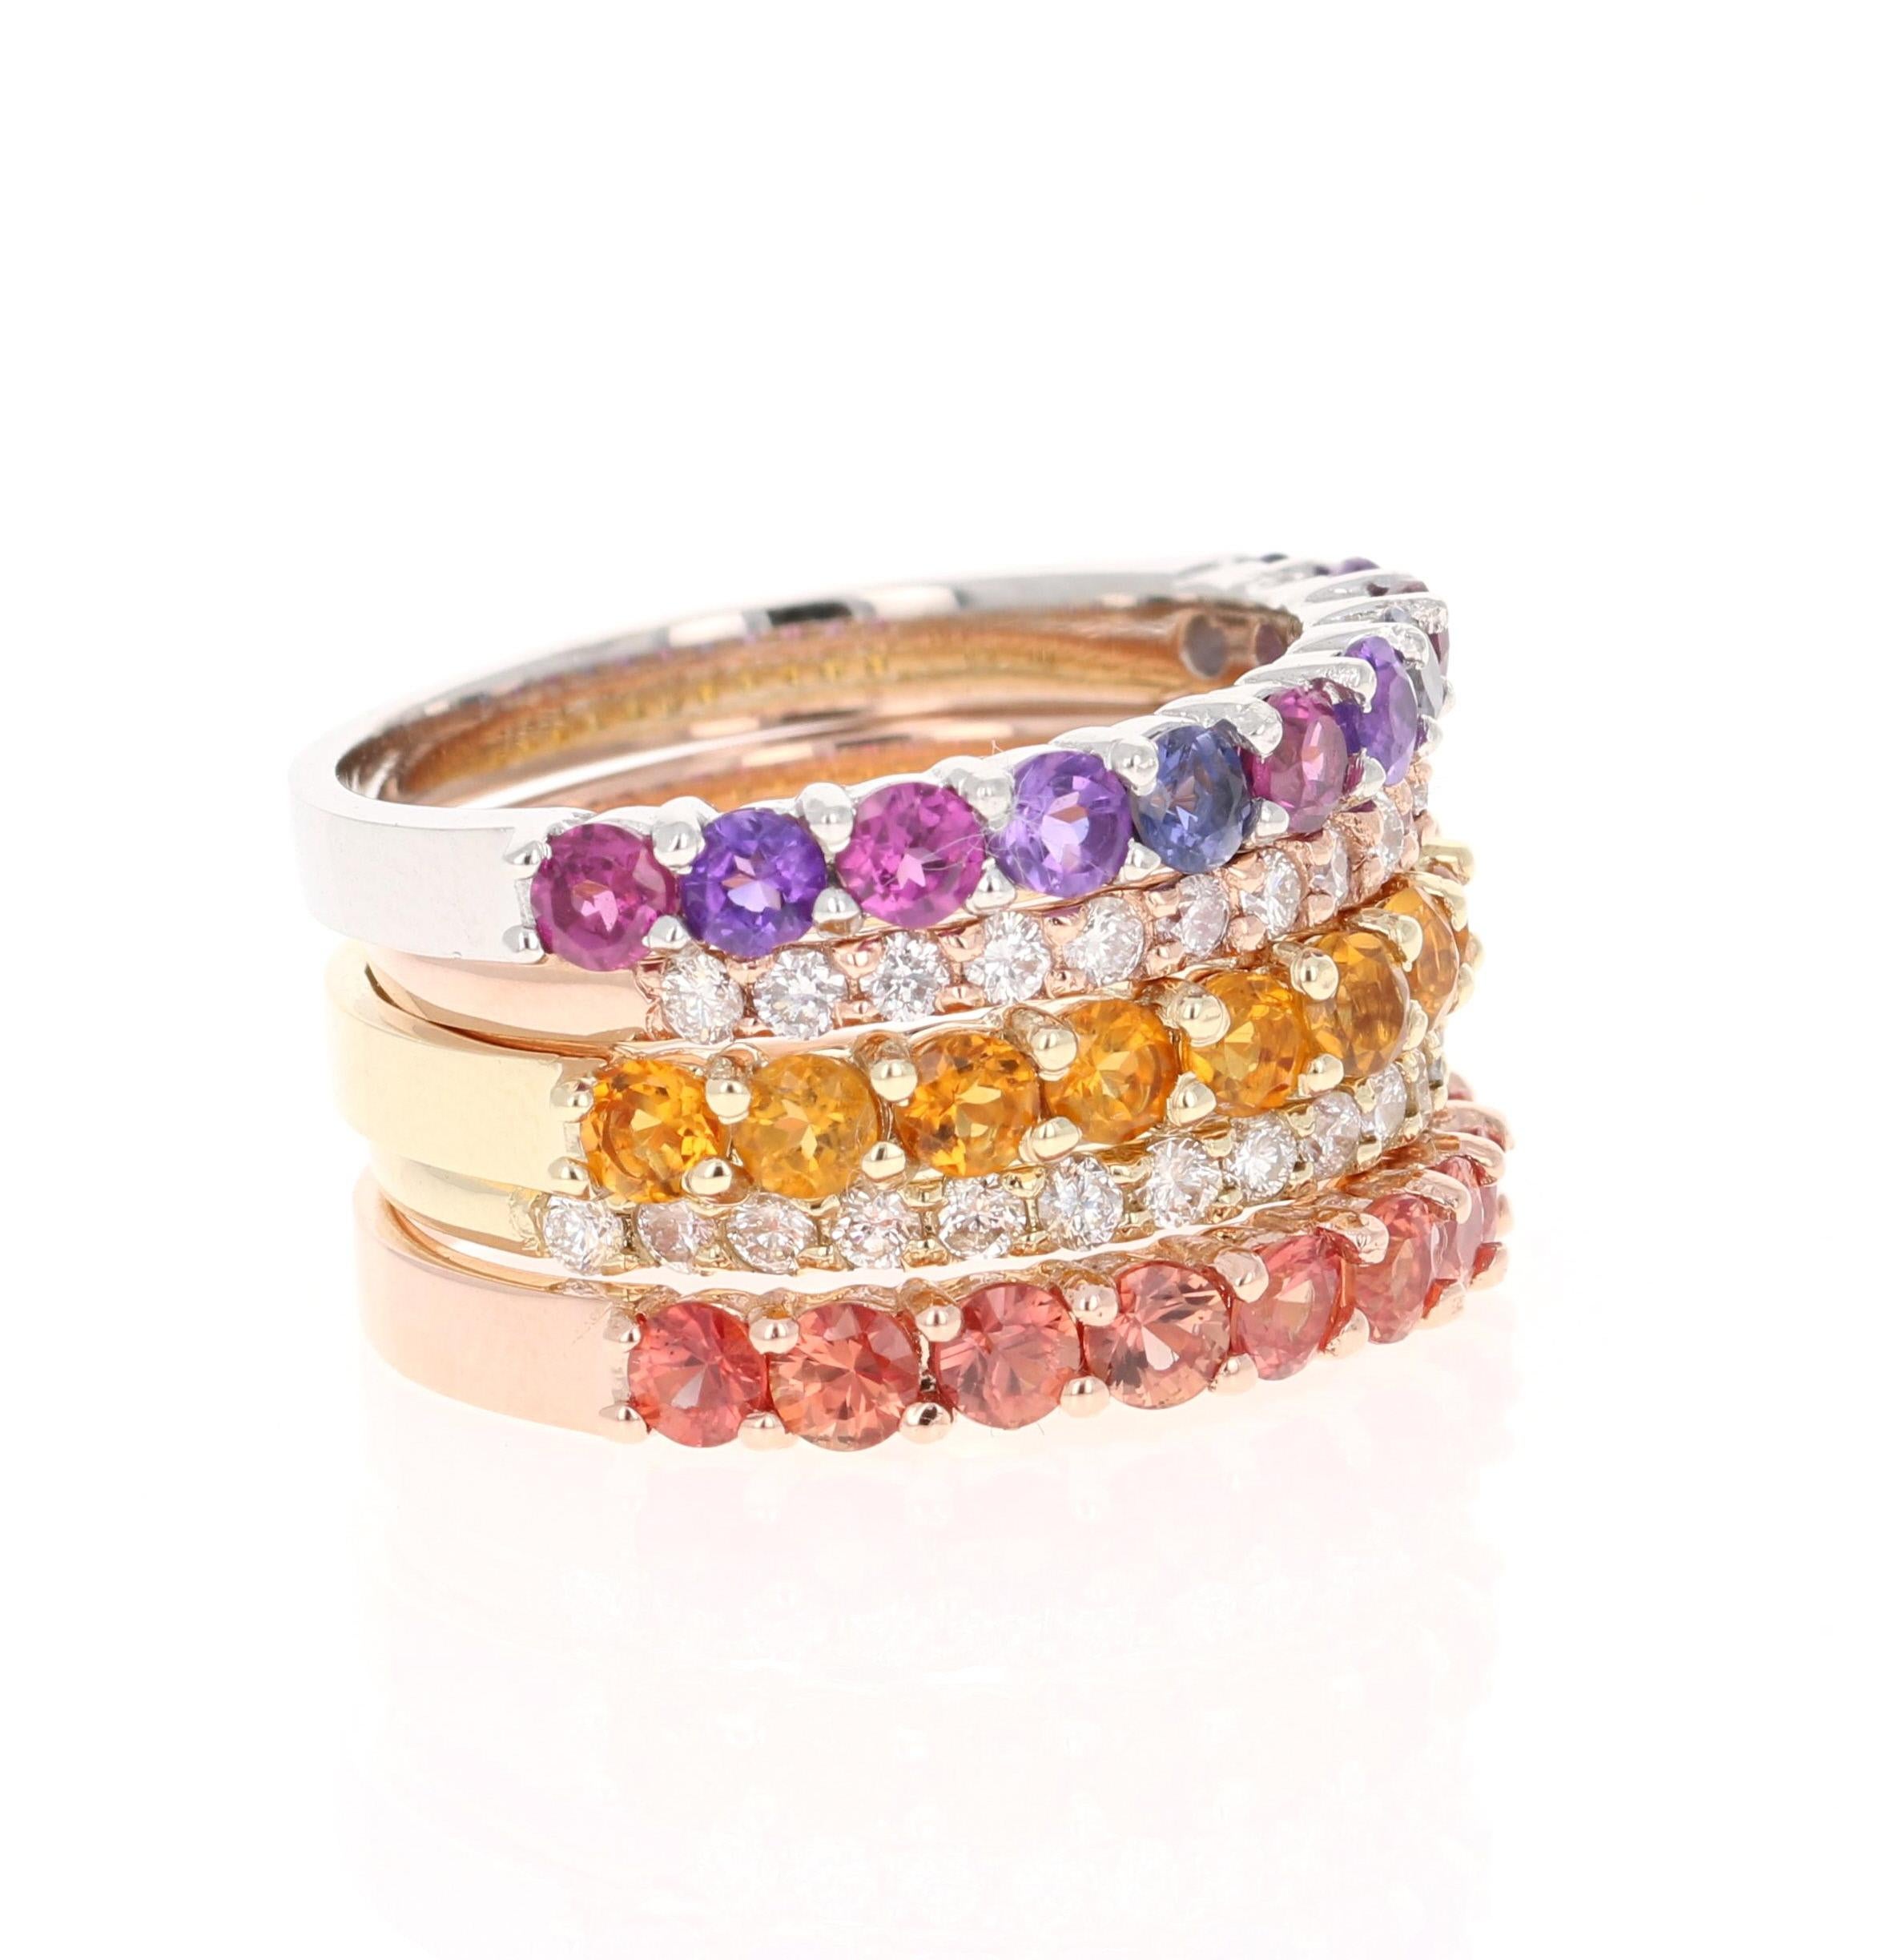 3.33 Carat Multi Color Gemstone Diamond Gold Stackable Bands

These versatile stackable bands can be worn in multiple ways and can even be used with other jewelry. You can use only the diamond bands or the colored bands, where them stacked or as